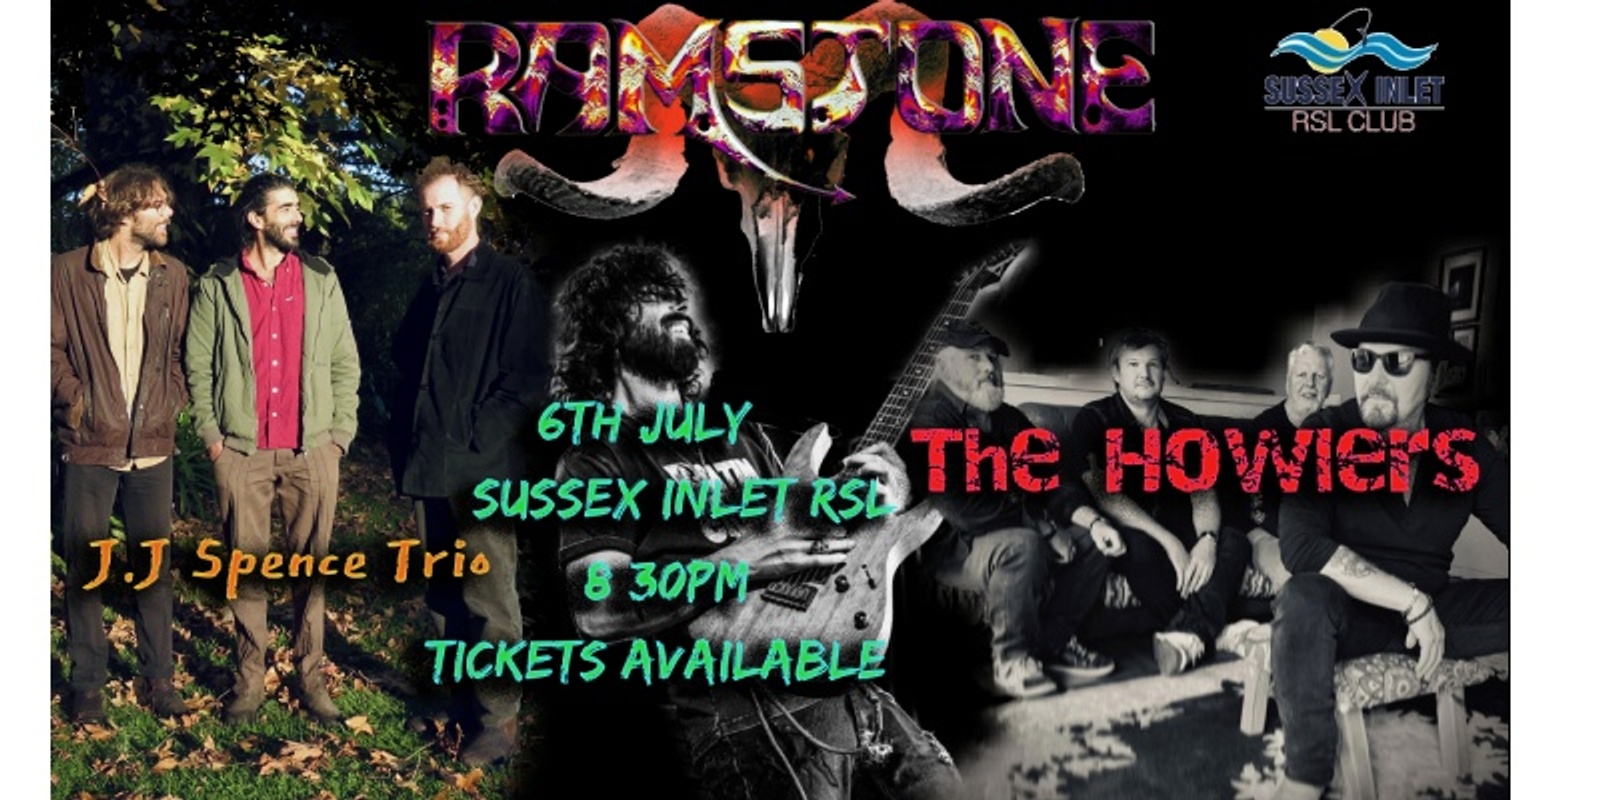 Banner image for RAMSTONE ft. The Howlers & J.J Spence Trio